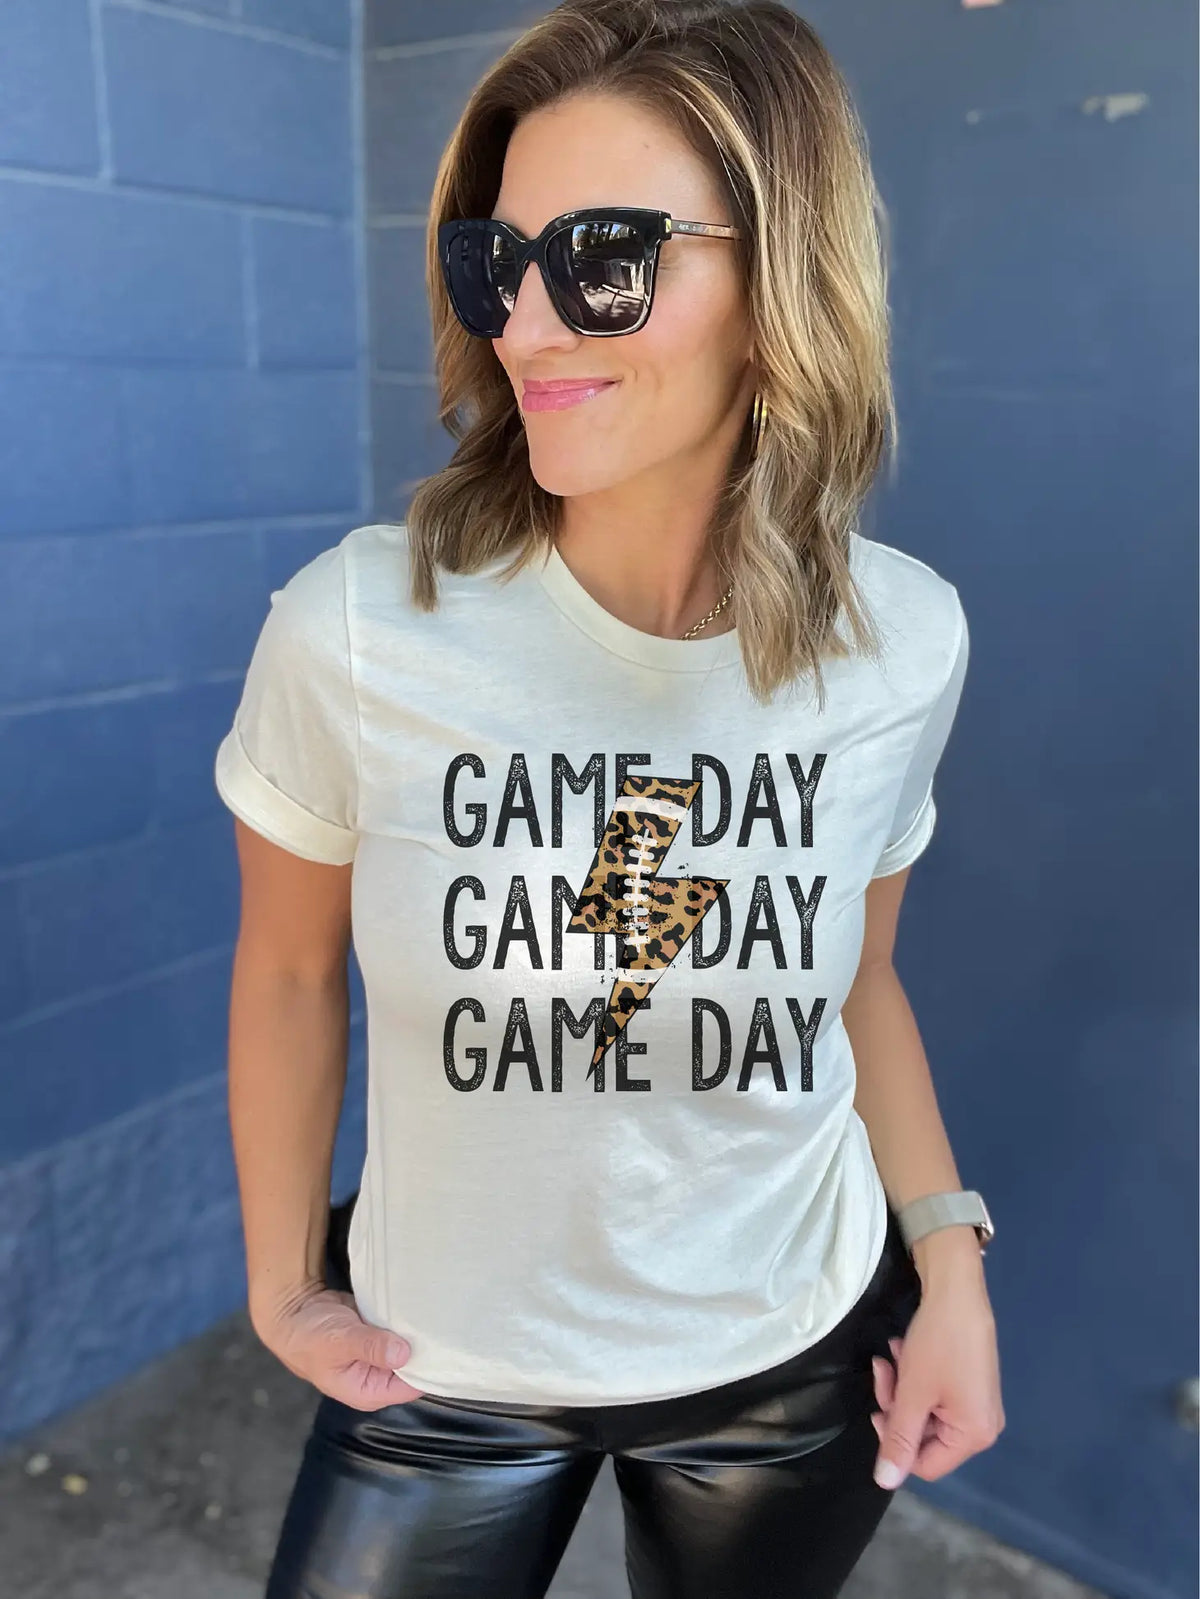 Game Day Lightning Bolt Graphic Tee